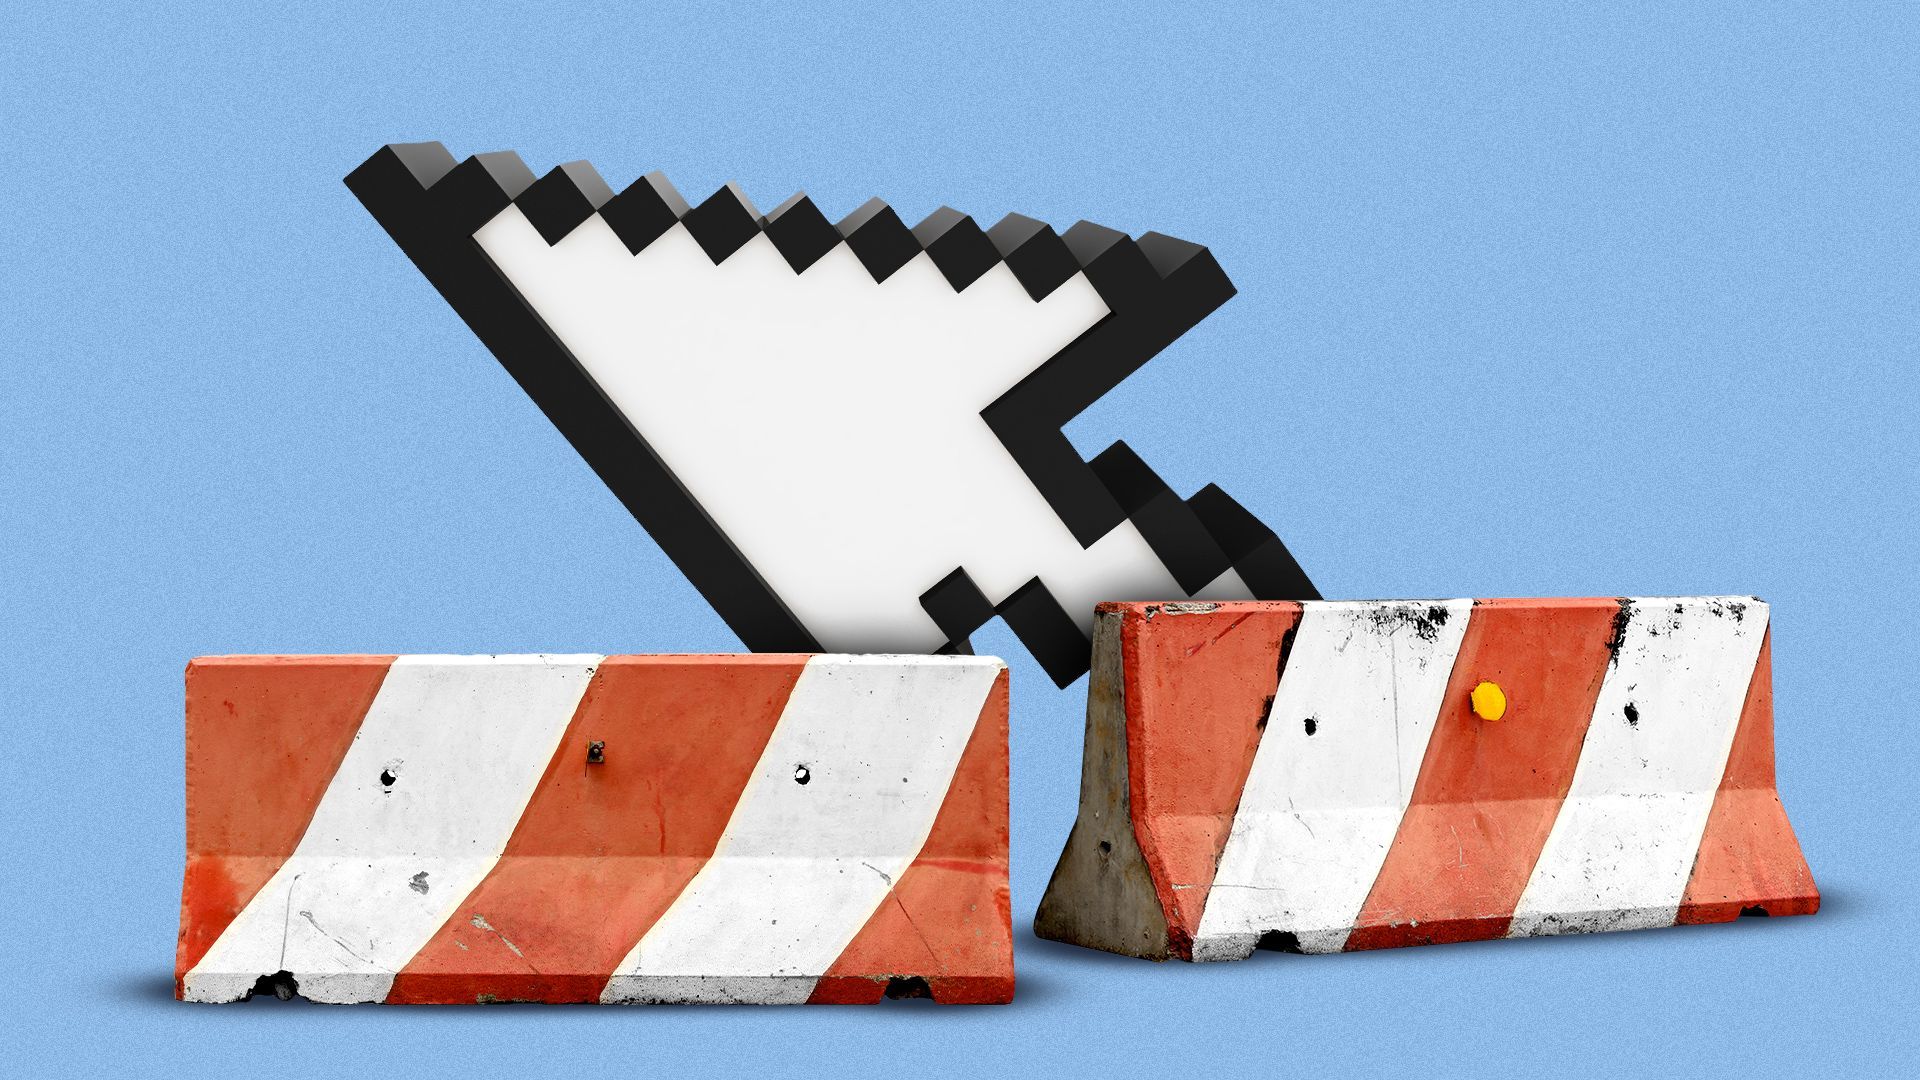 Illustration of a giant cursor with two concrete road work barriers in front of it. 